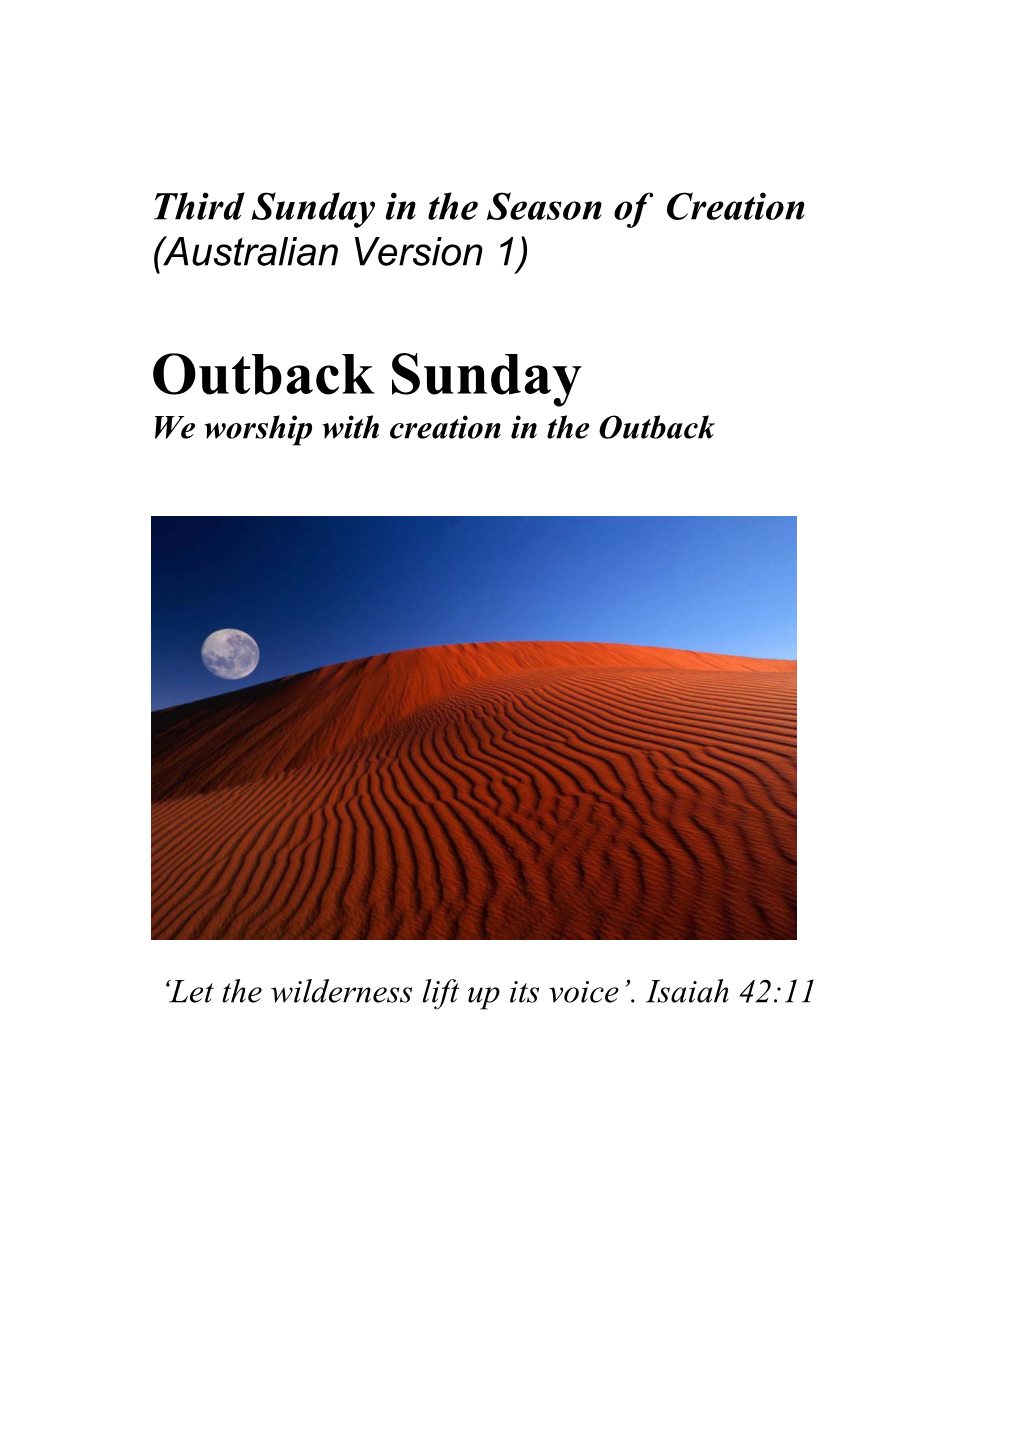 We Worship with Creation in the Outback